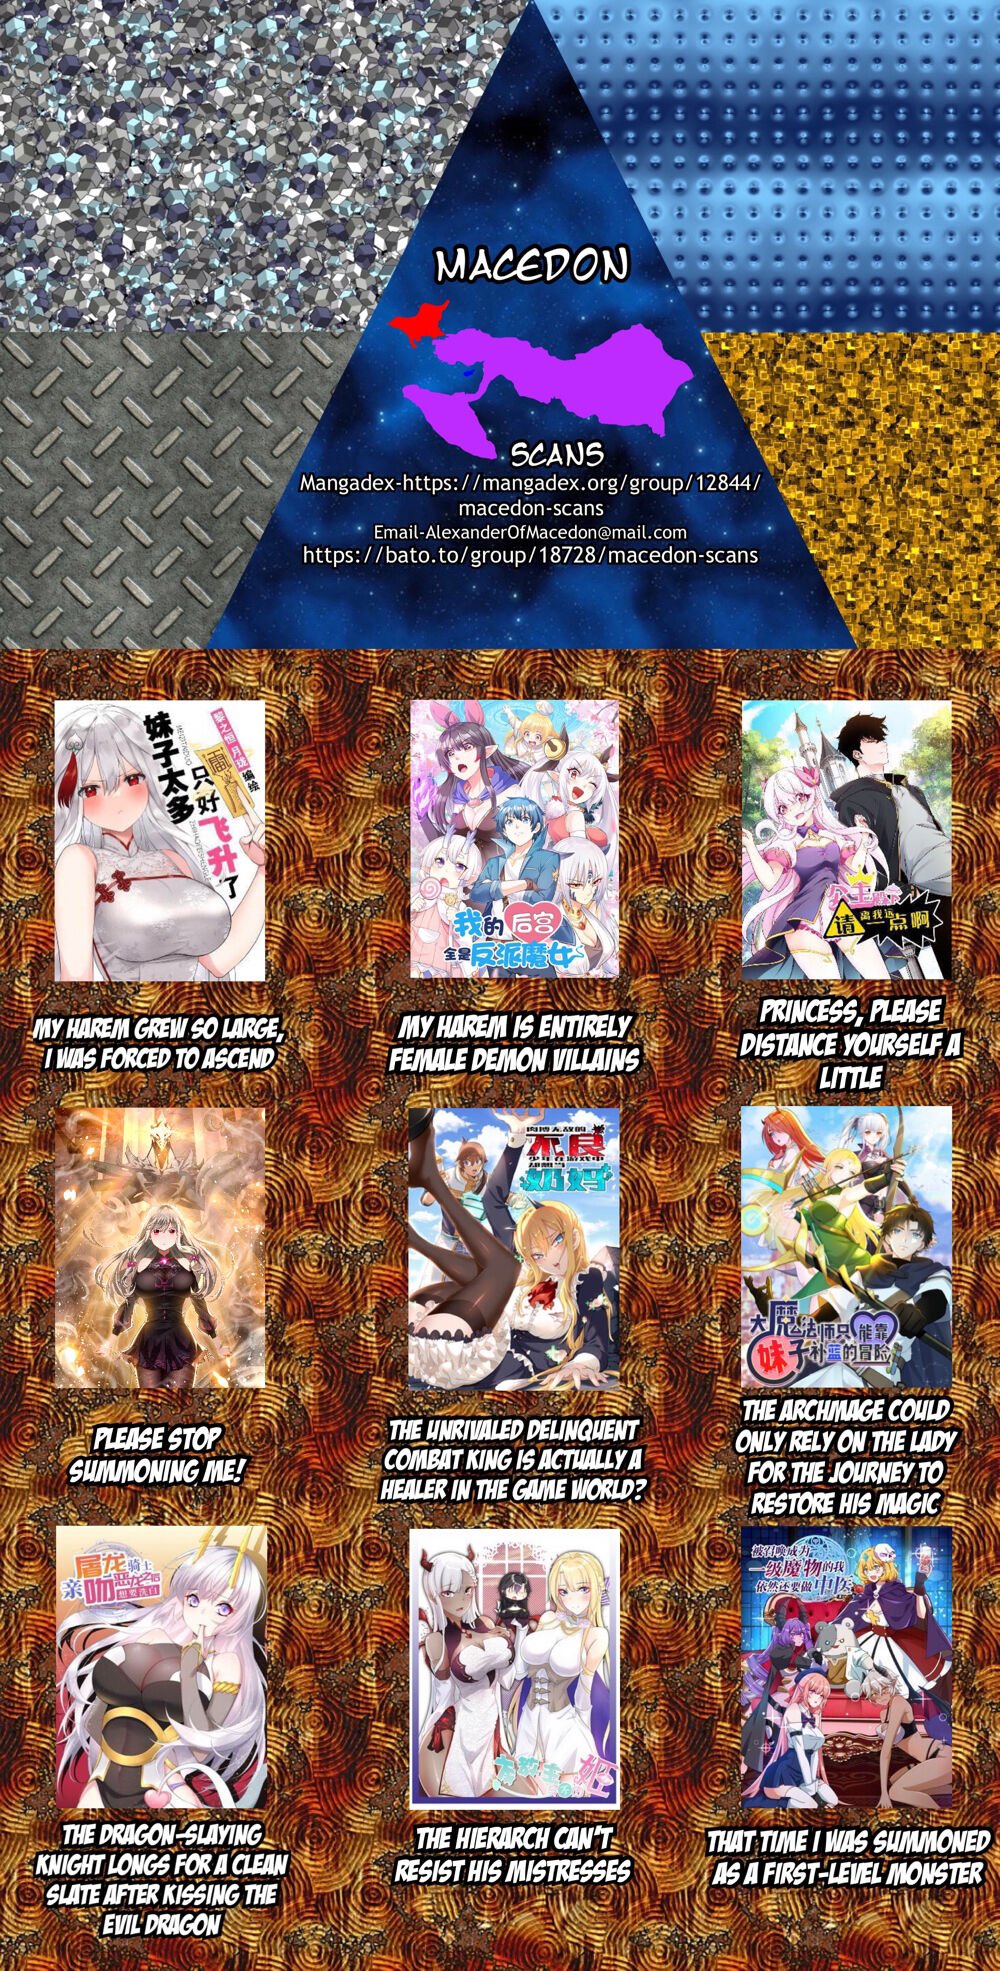 My Harem Is Entirely Female Demon Villains chapter 22